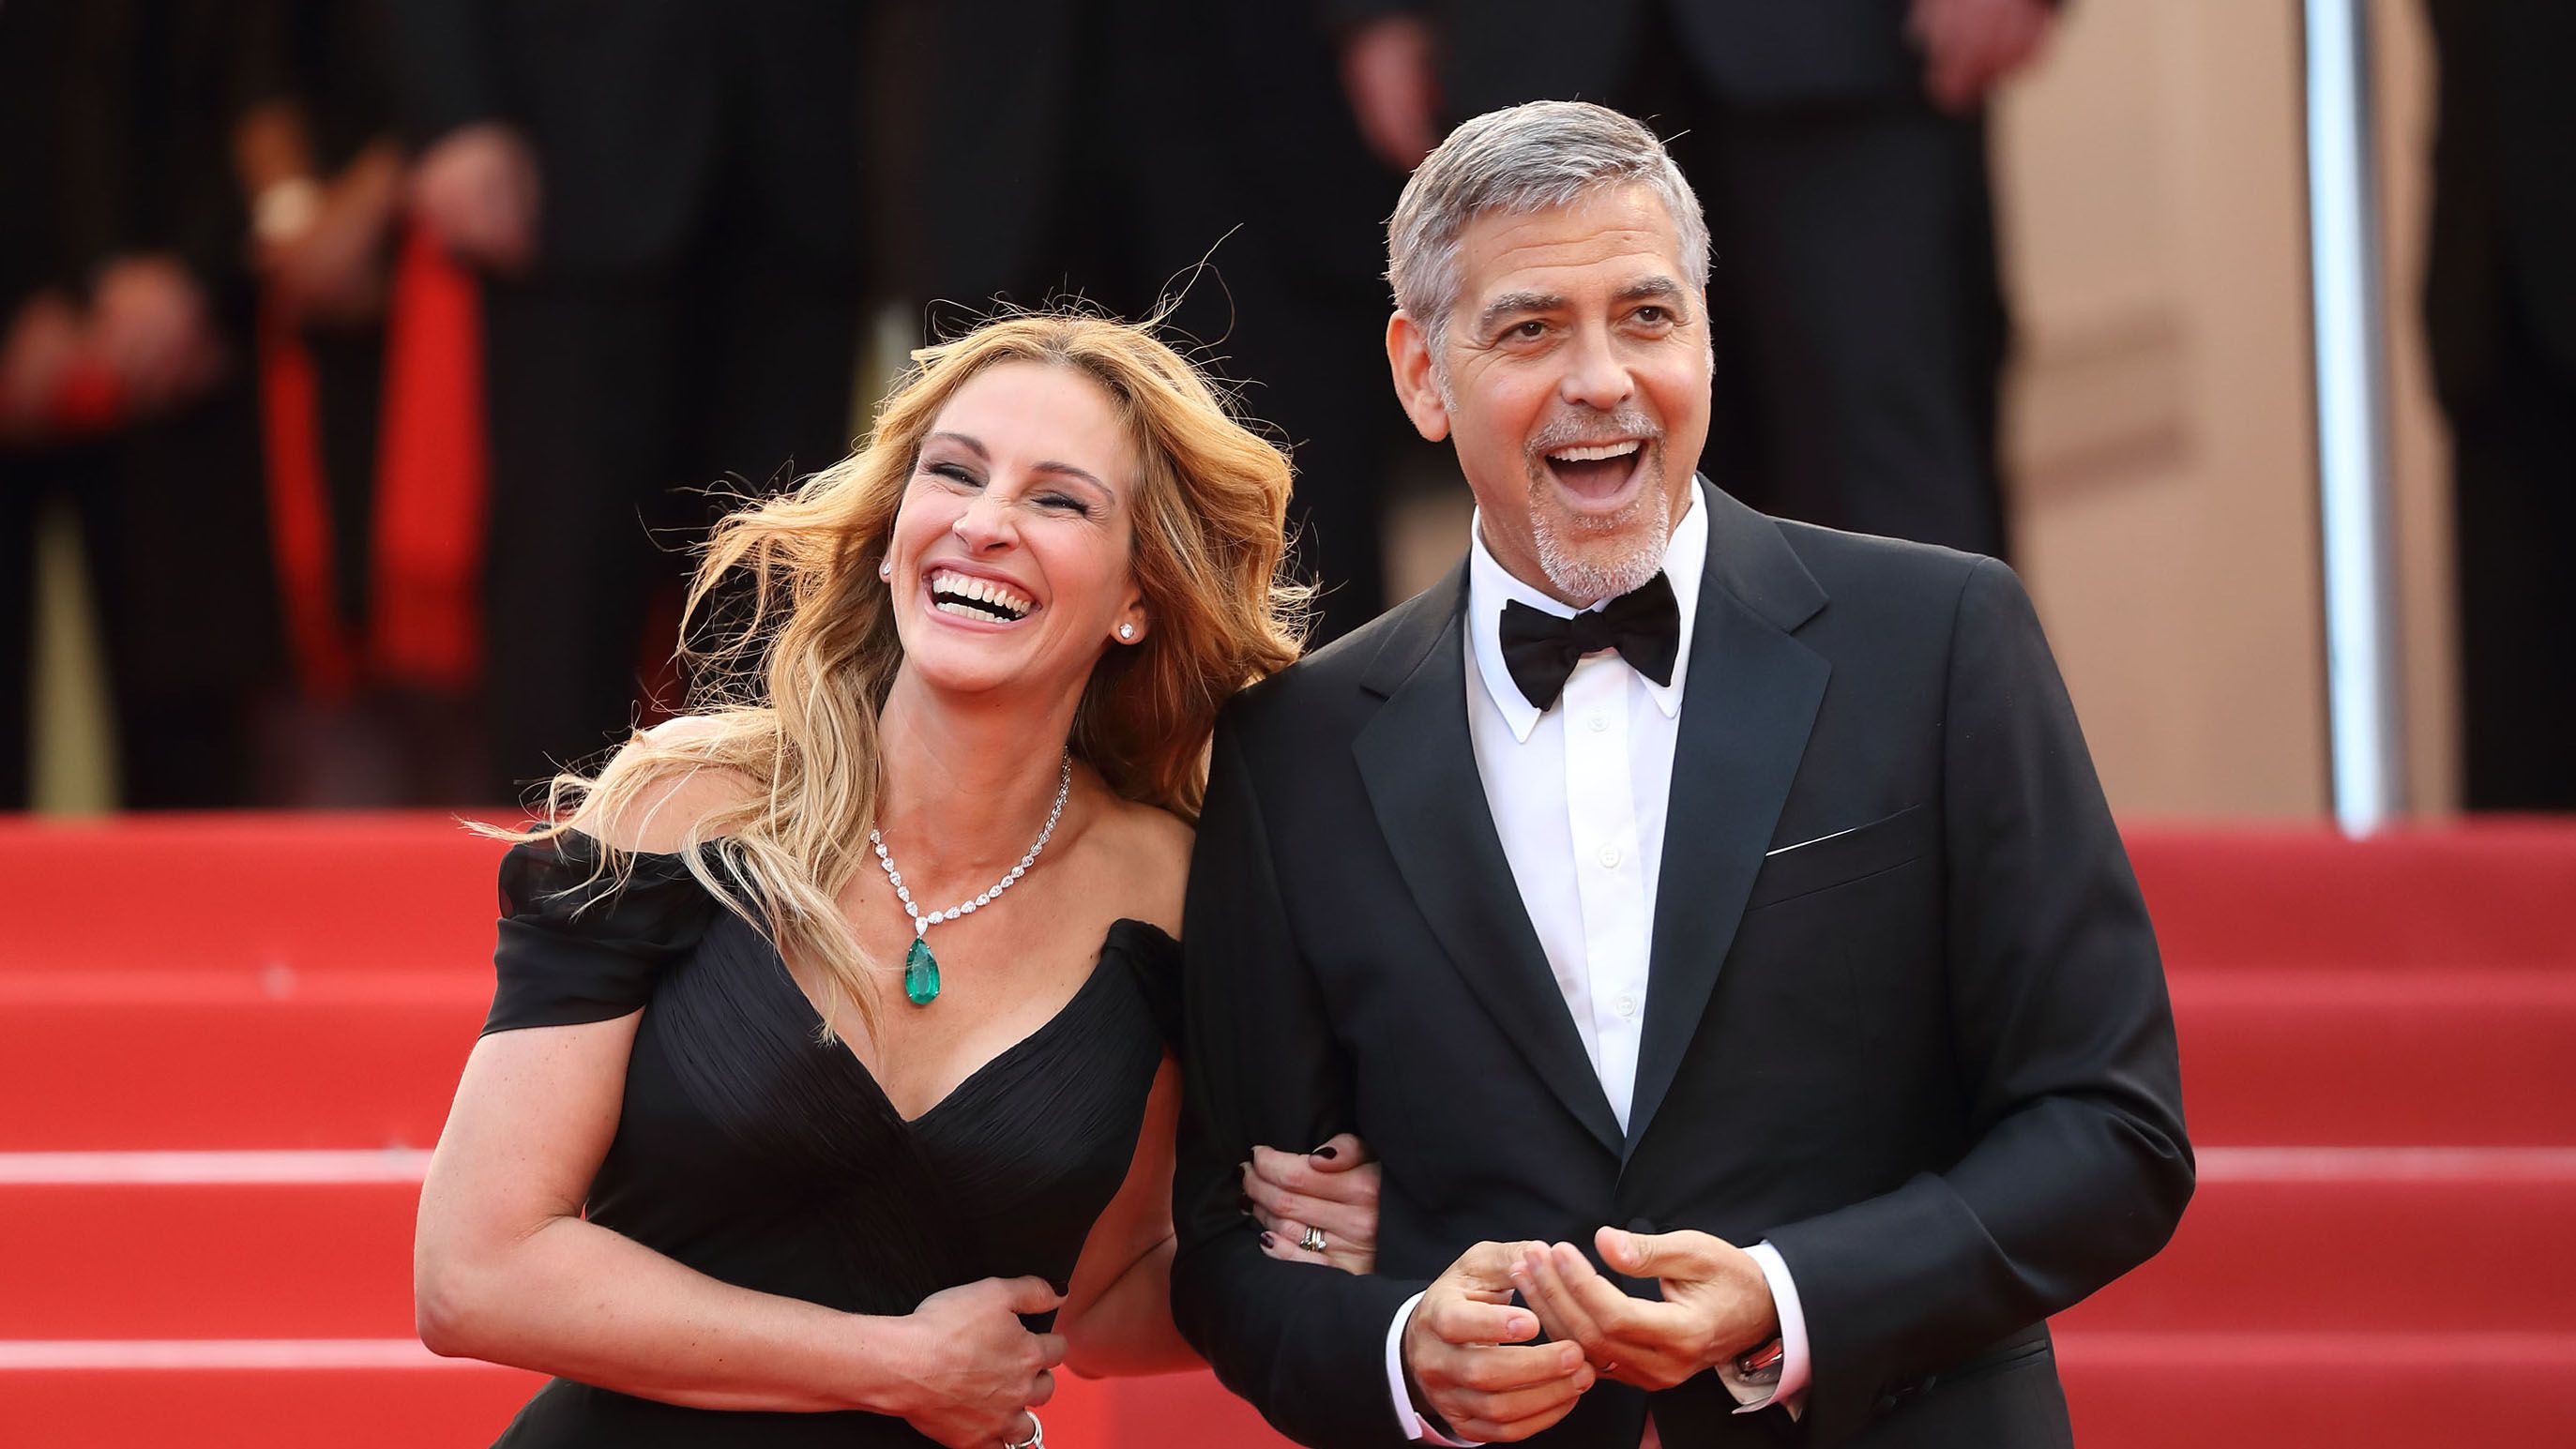 Julia Roberts at Cannes: Cinema Is the Love of My Life